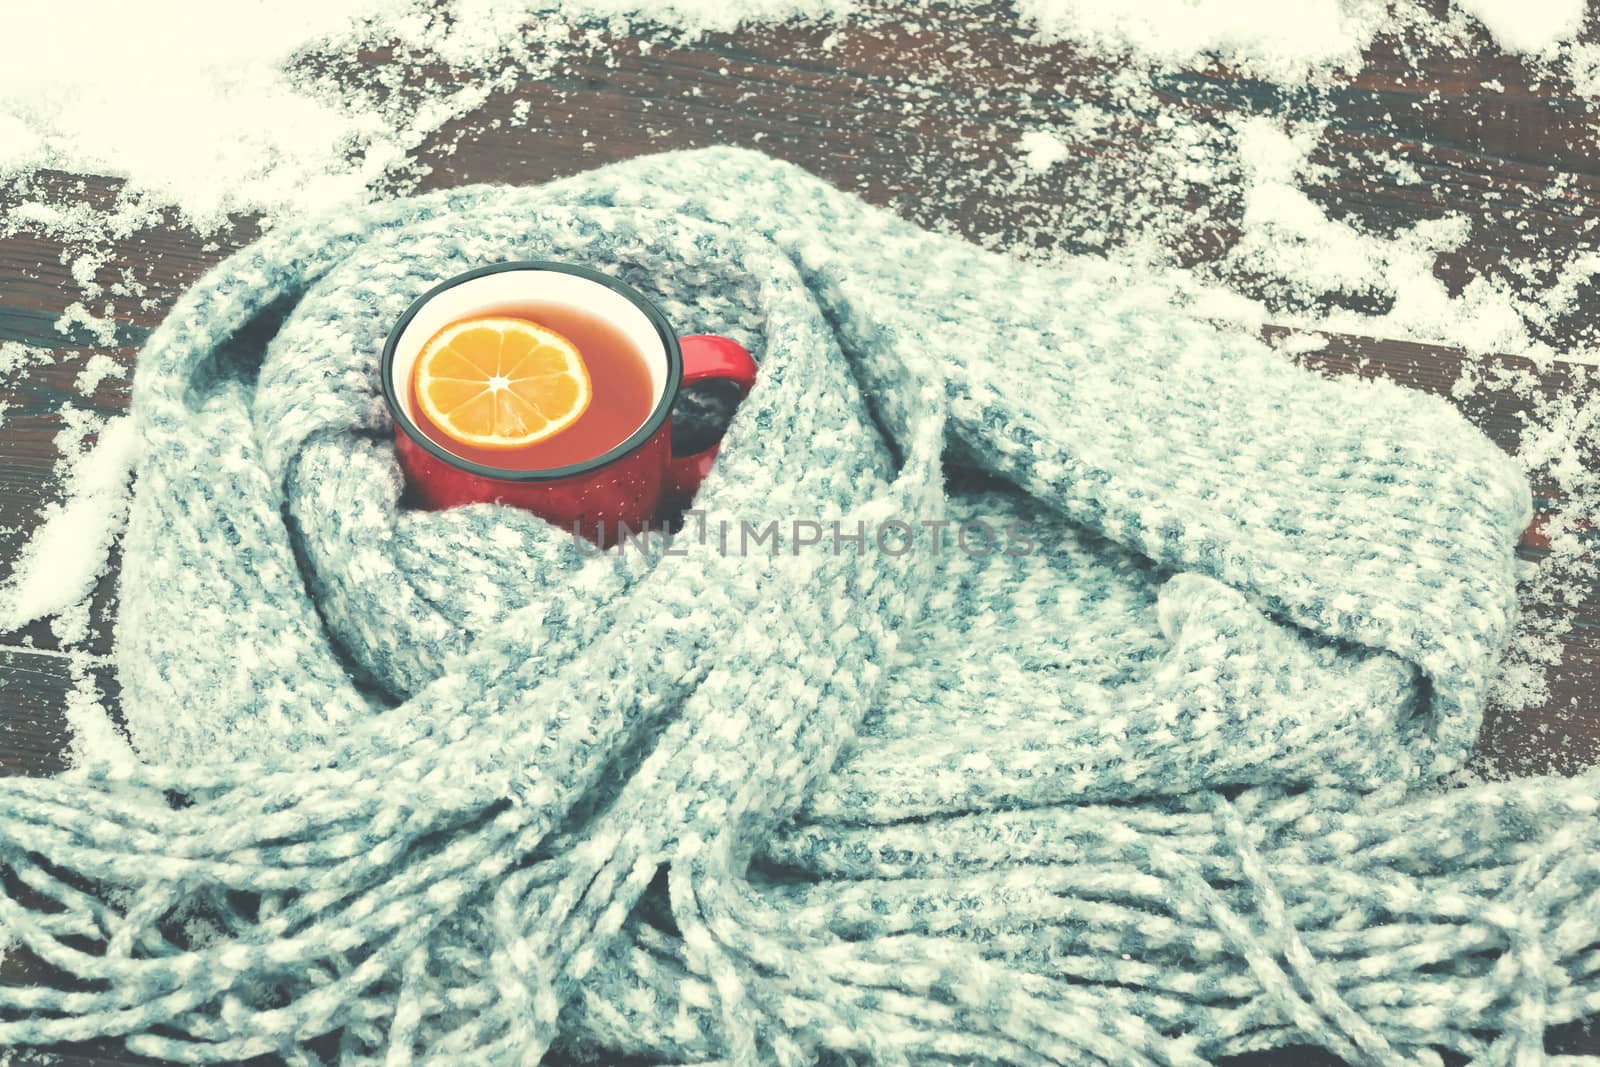 Red enameled cup of hot tea with lemon wrapped in a knitted scarf on a snowy wooden table.